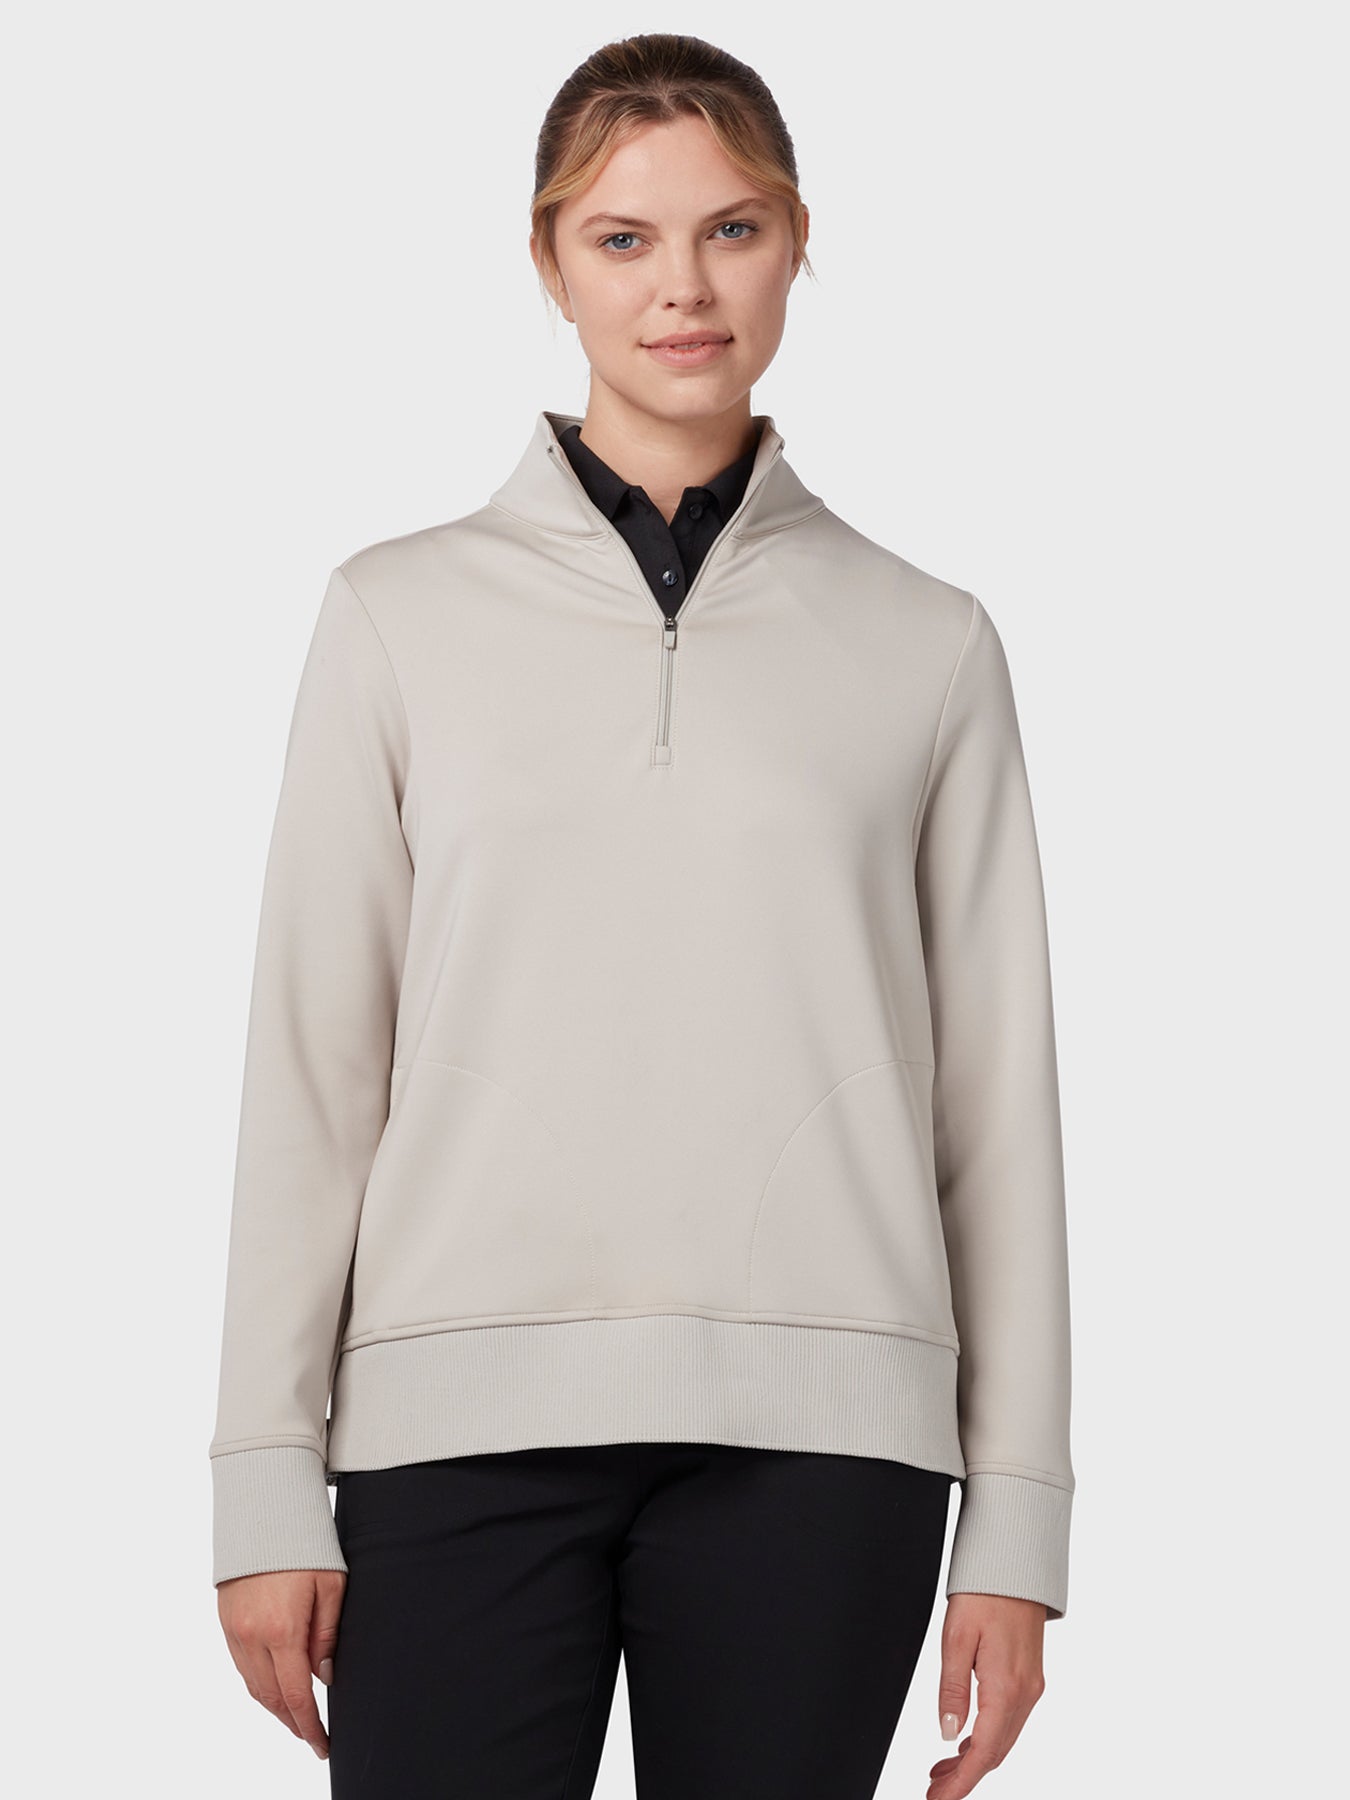 View Midweight Womens Fleece Crossover In Chateau Grey Chateau Grey S information